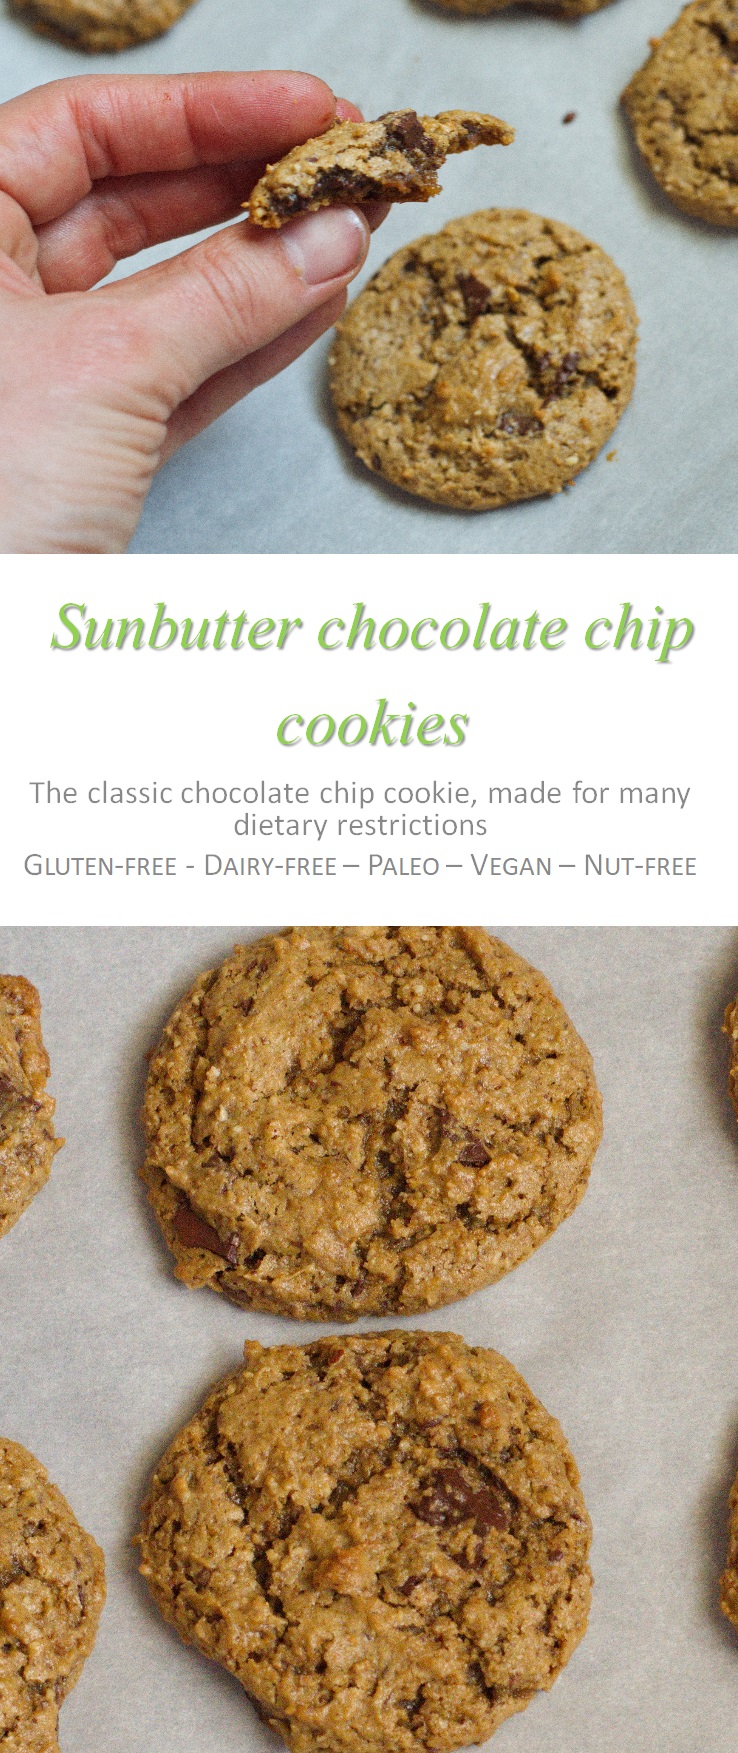 These sunbutter chocolate chip cookies are nut-free, and vegan, but you'd never know it from the awesome texture and flavor! #sunbutter #cookies #glutenfree #dairyfree #vegan #norefinedsugar #paleo